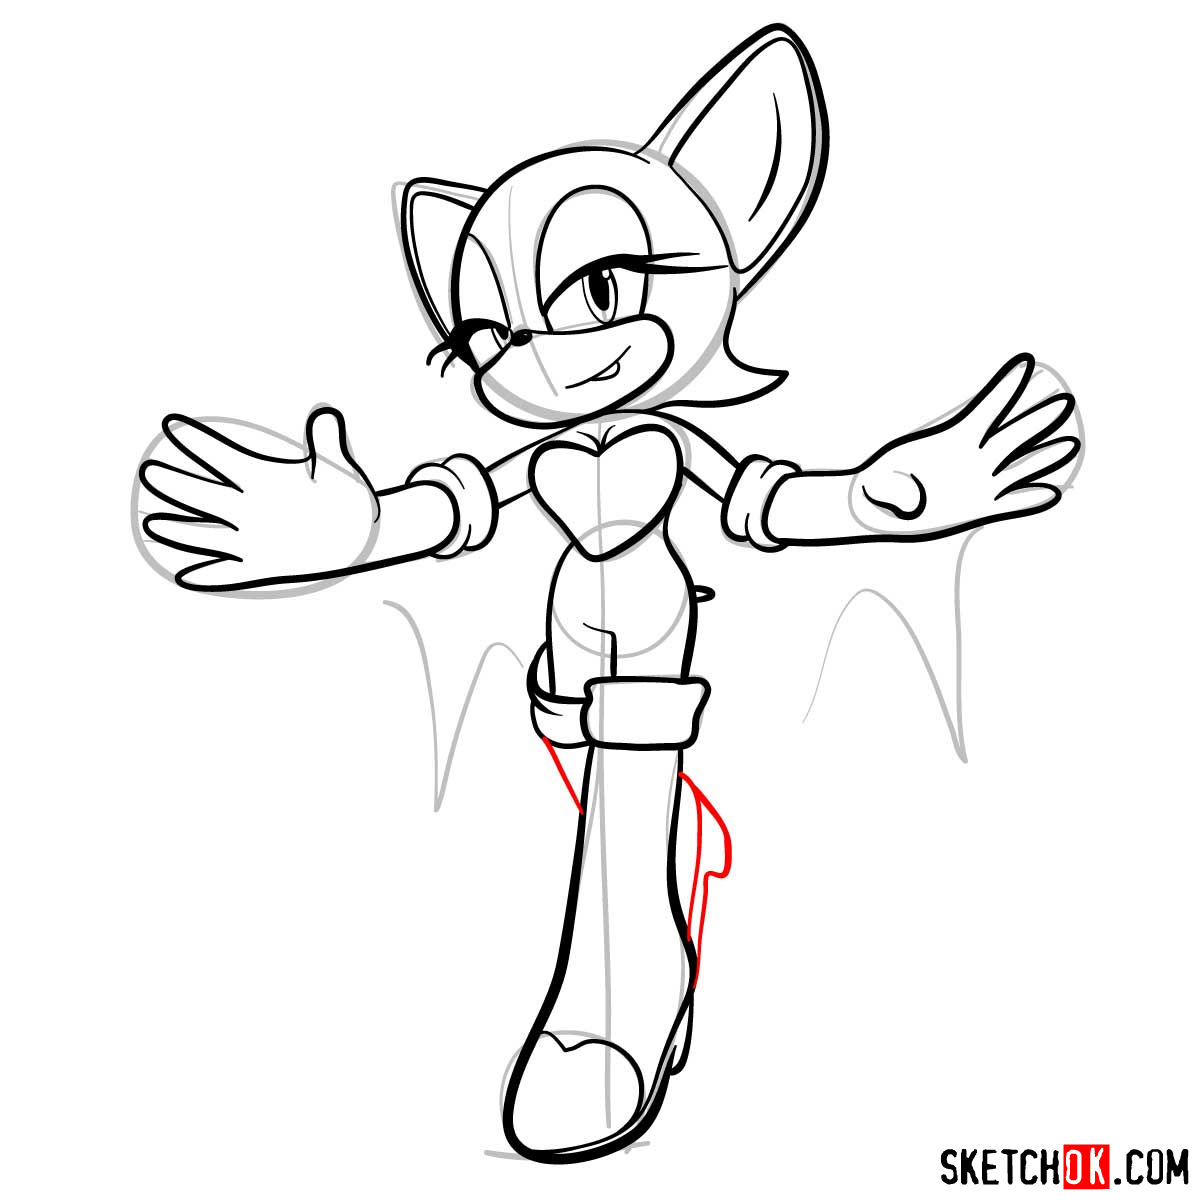 How to draw Rouge the Bat from Sonic the Hedgehog - step 11